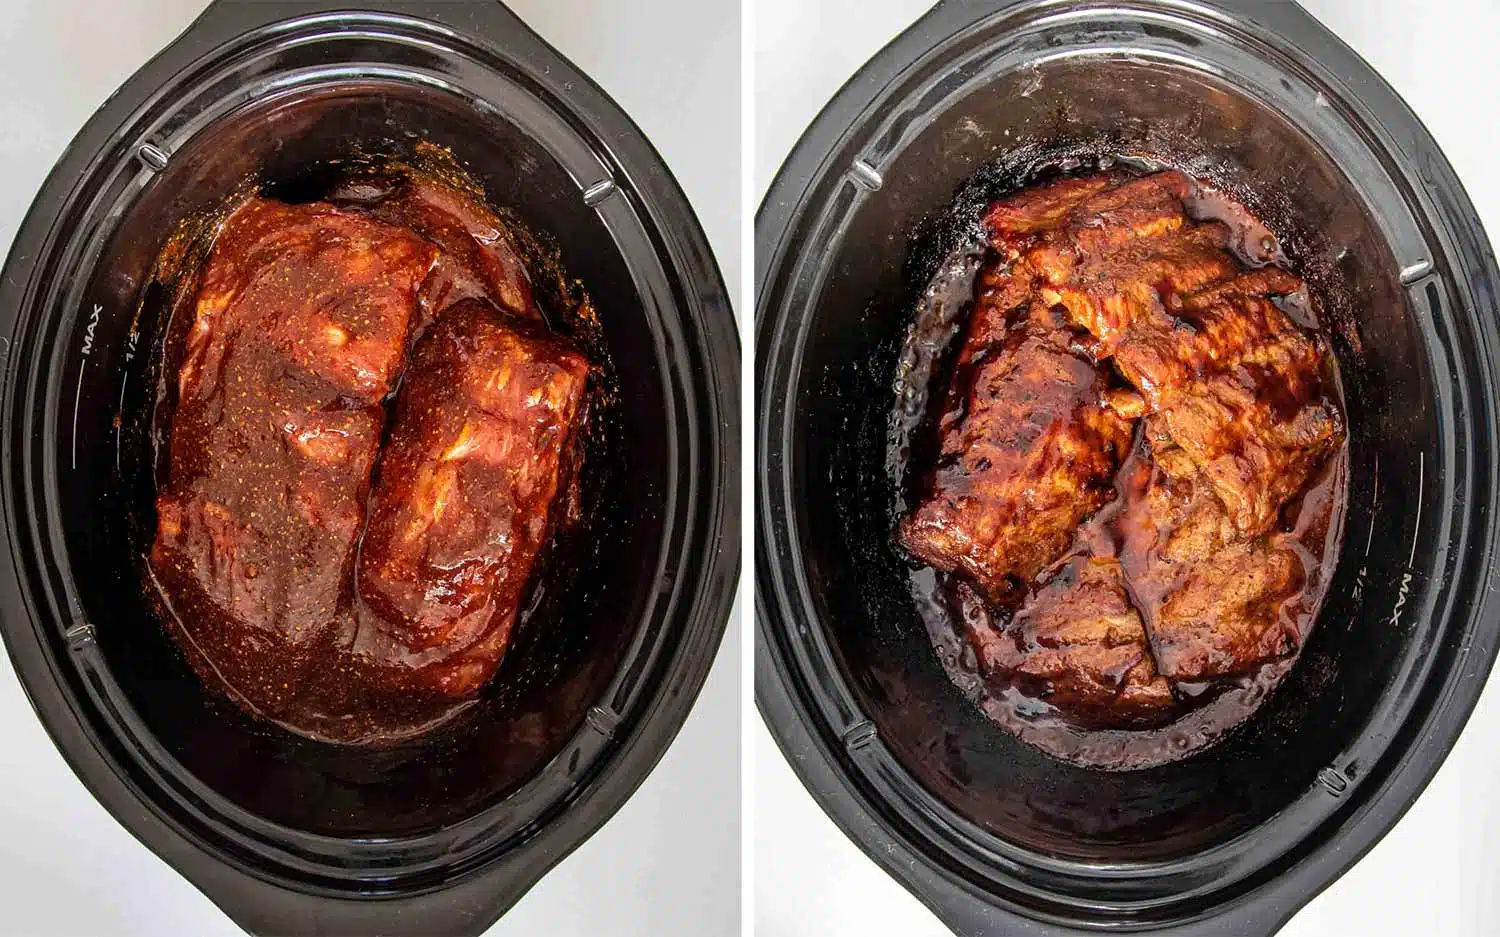 process shots showing how to make slow cooker ribs.